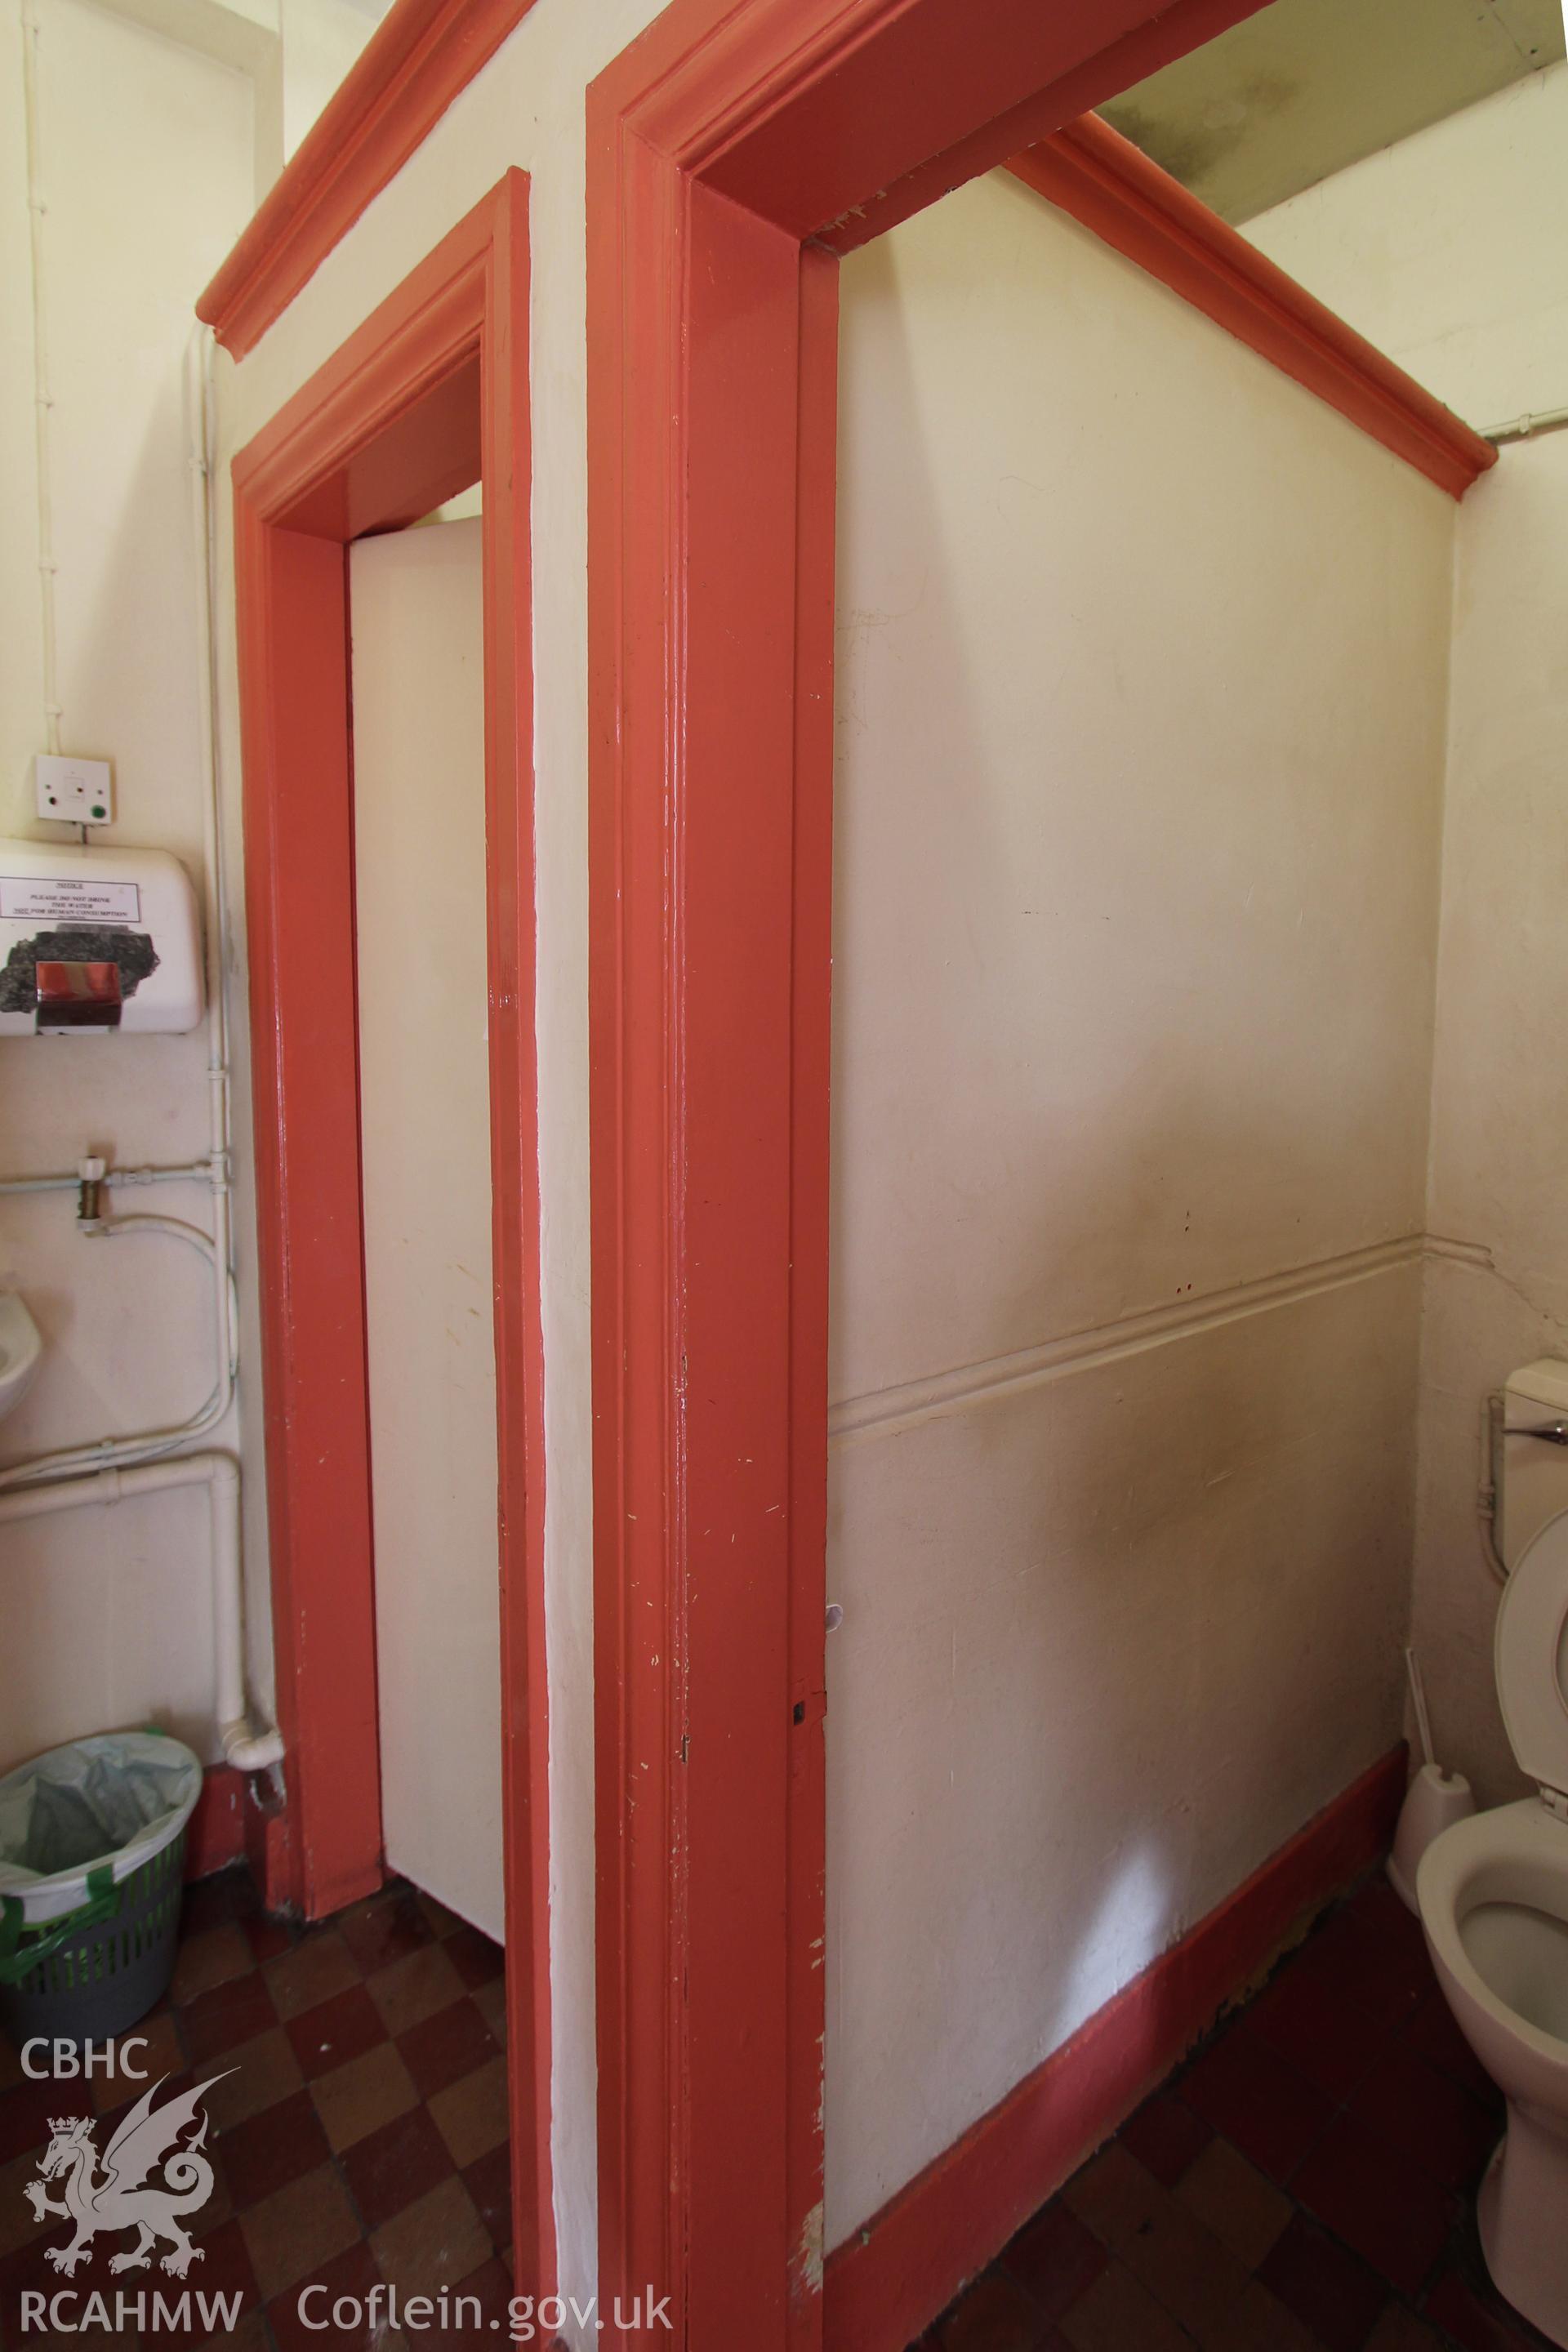 Interior view of bathroom at the Railway Institute, Bangor. Photographed during survey conducted by Sue Fielding for the RCAHMW on 4th April 2016.